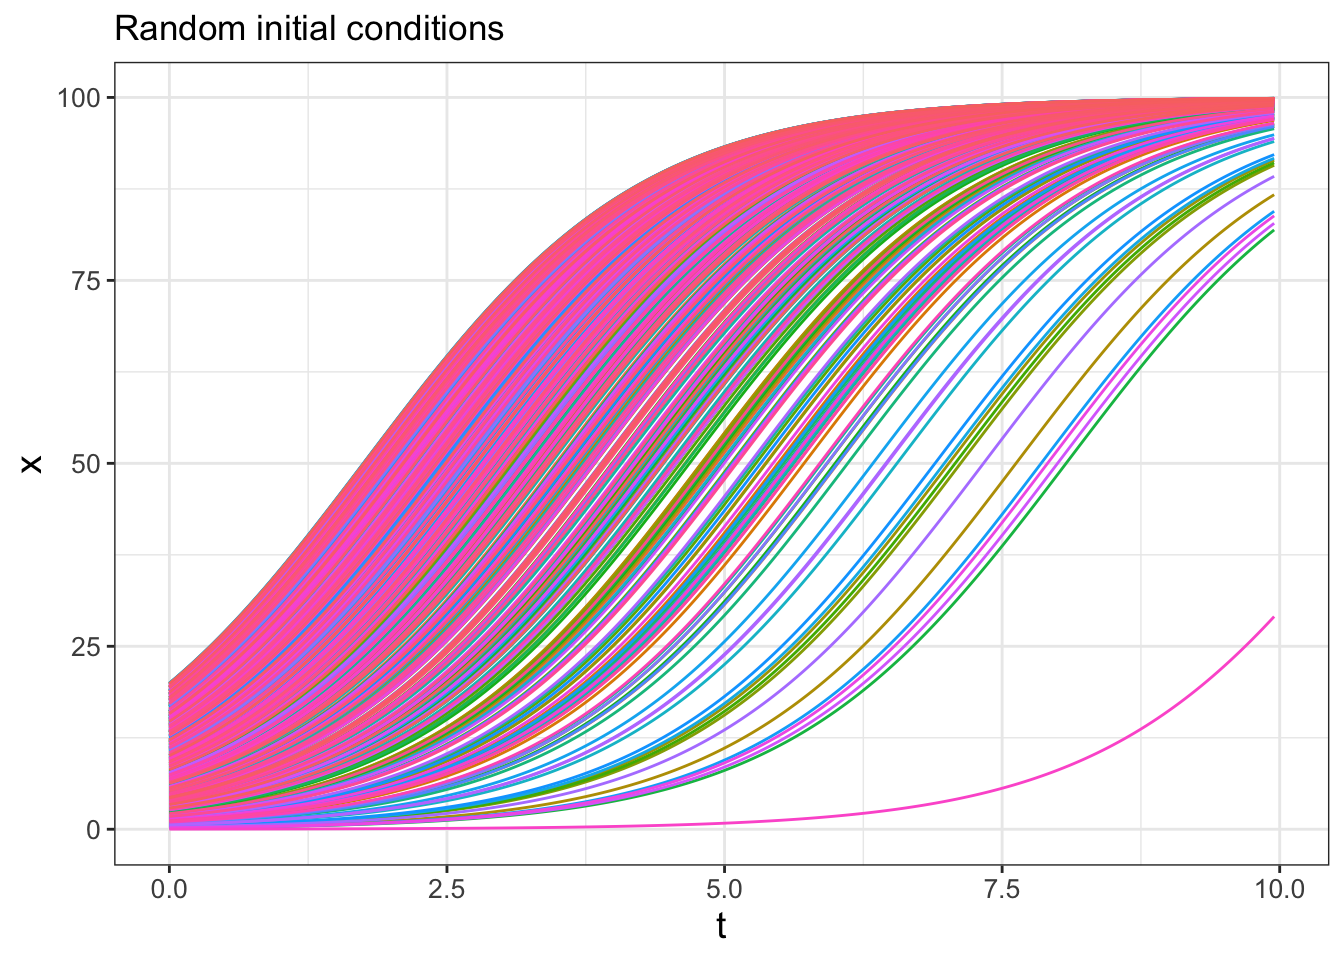 Spaghetti plot for logistic differential equation with 500 random initial conditions.